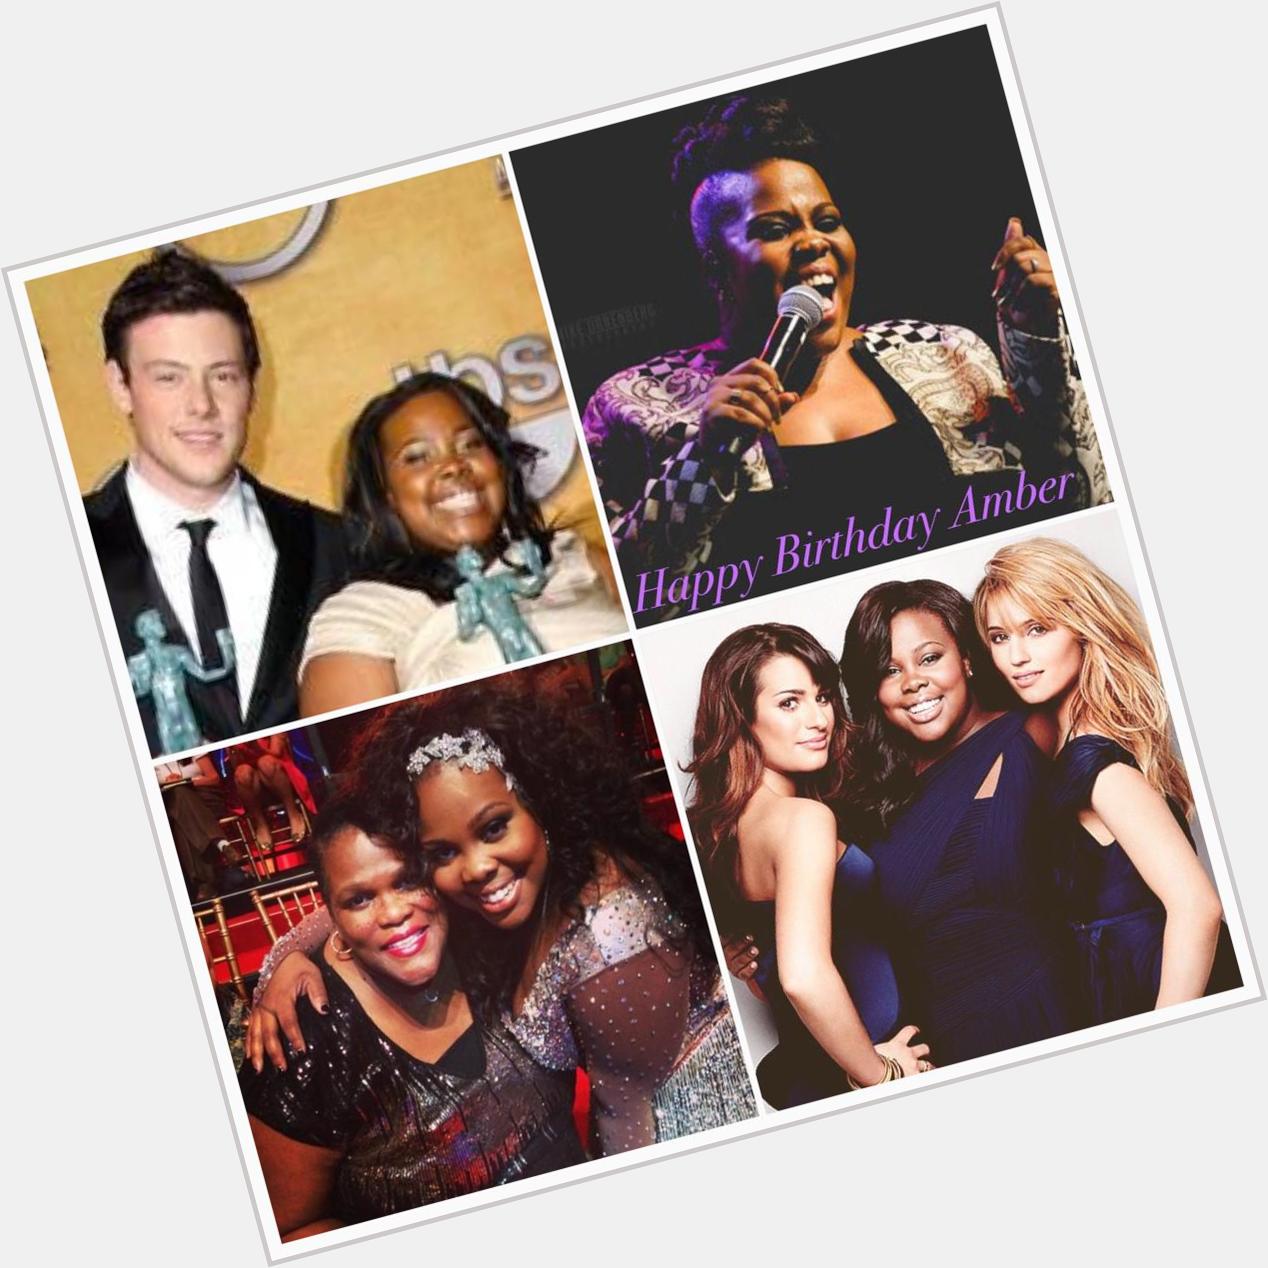 Happy Birthday Amber Riley    May this year be your best ever    